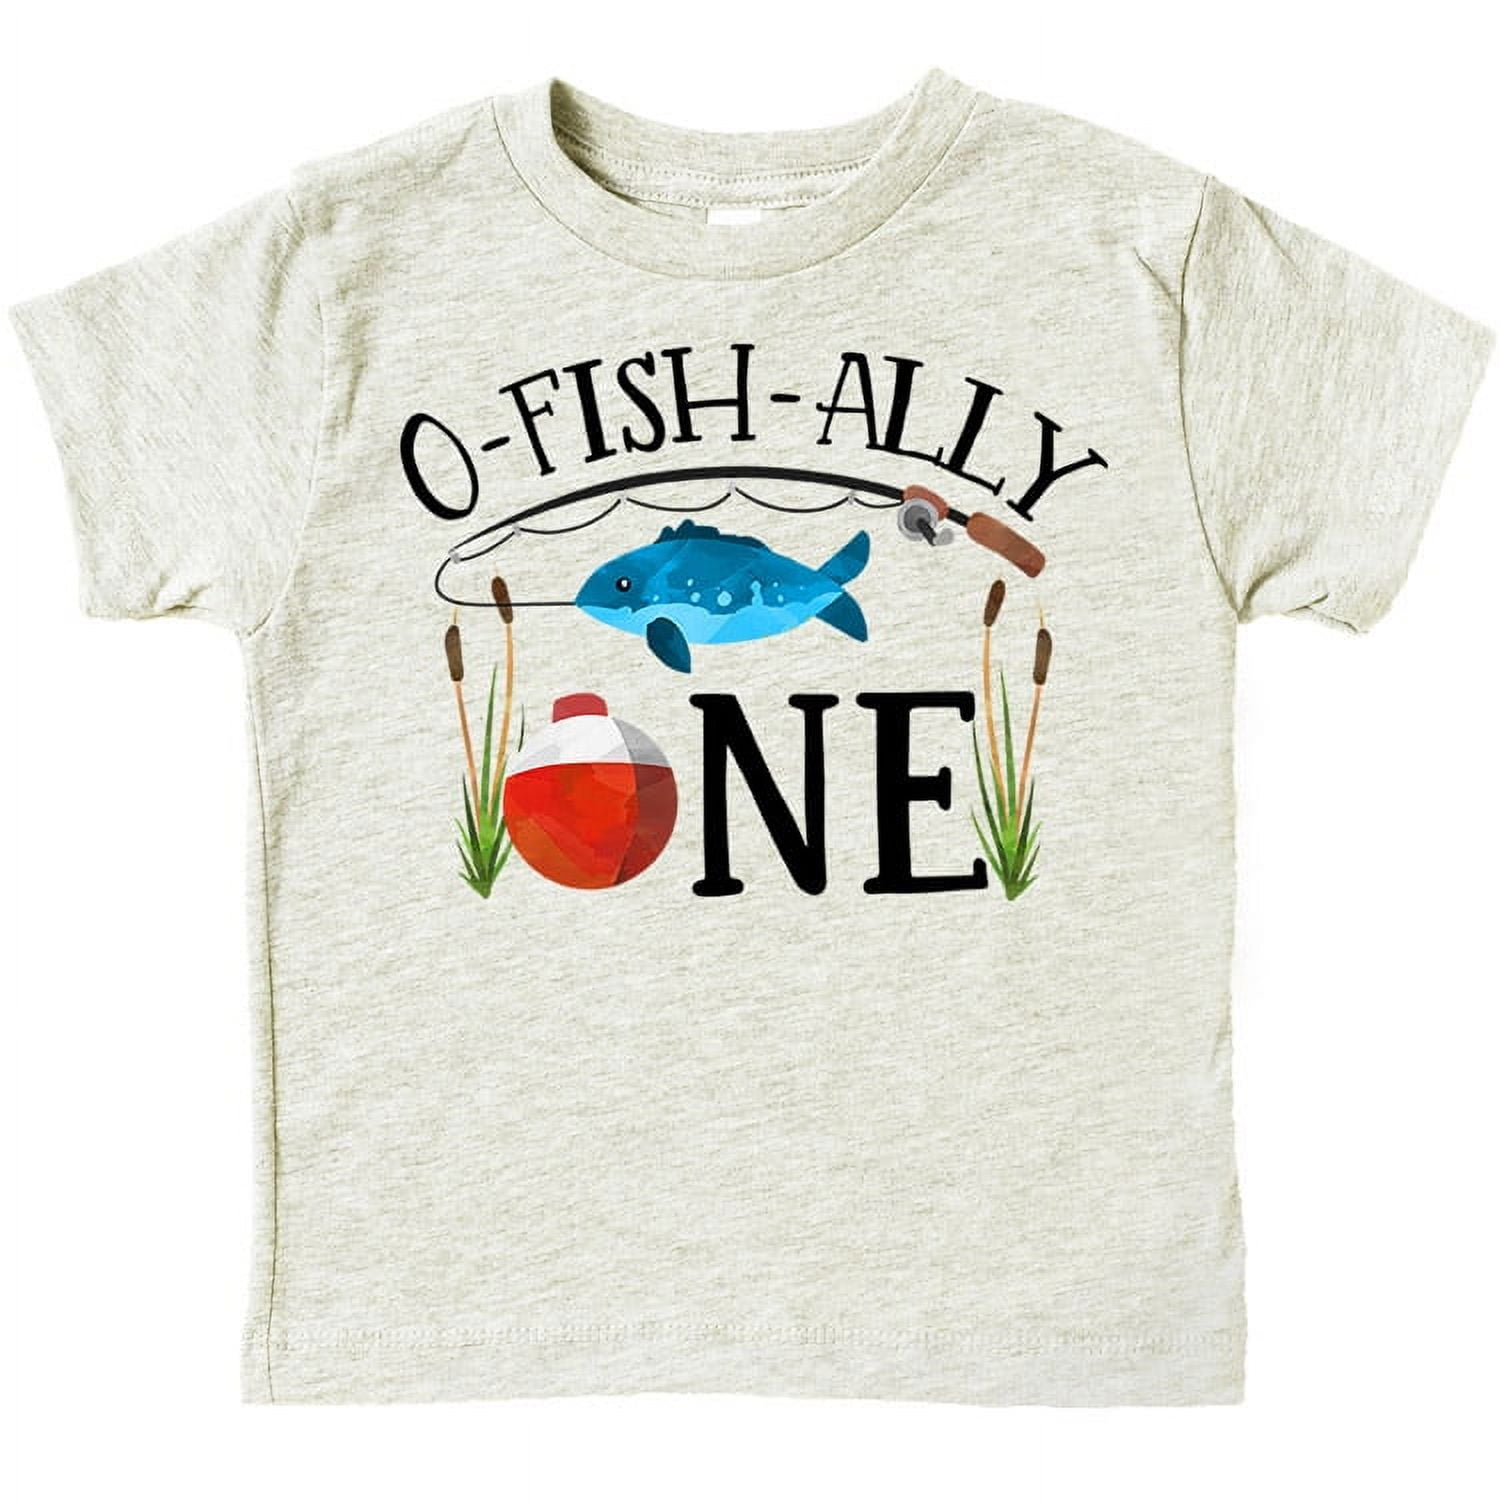 O-Fish-Ally- ONE Boys 1st Birthday Shirt for Baby Boys First Birthday  Outfit Chill Short Sleeve Shirt 